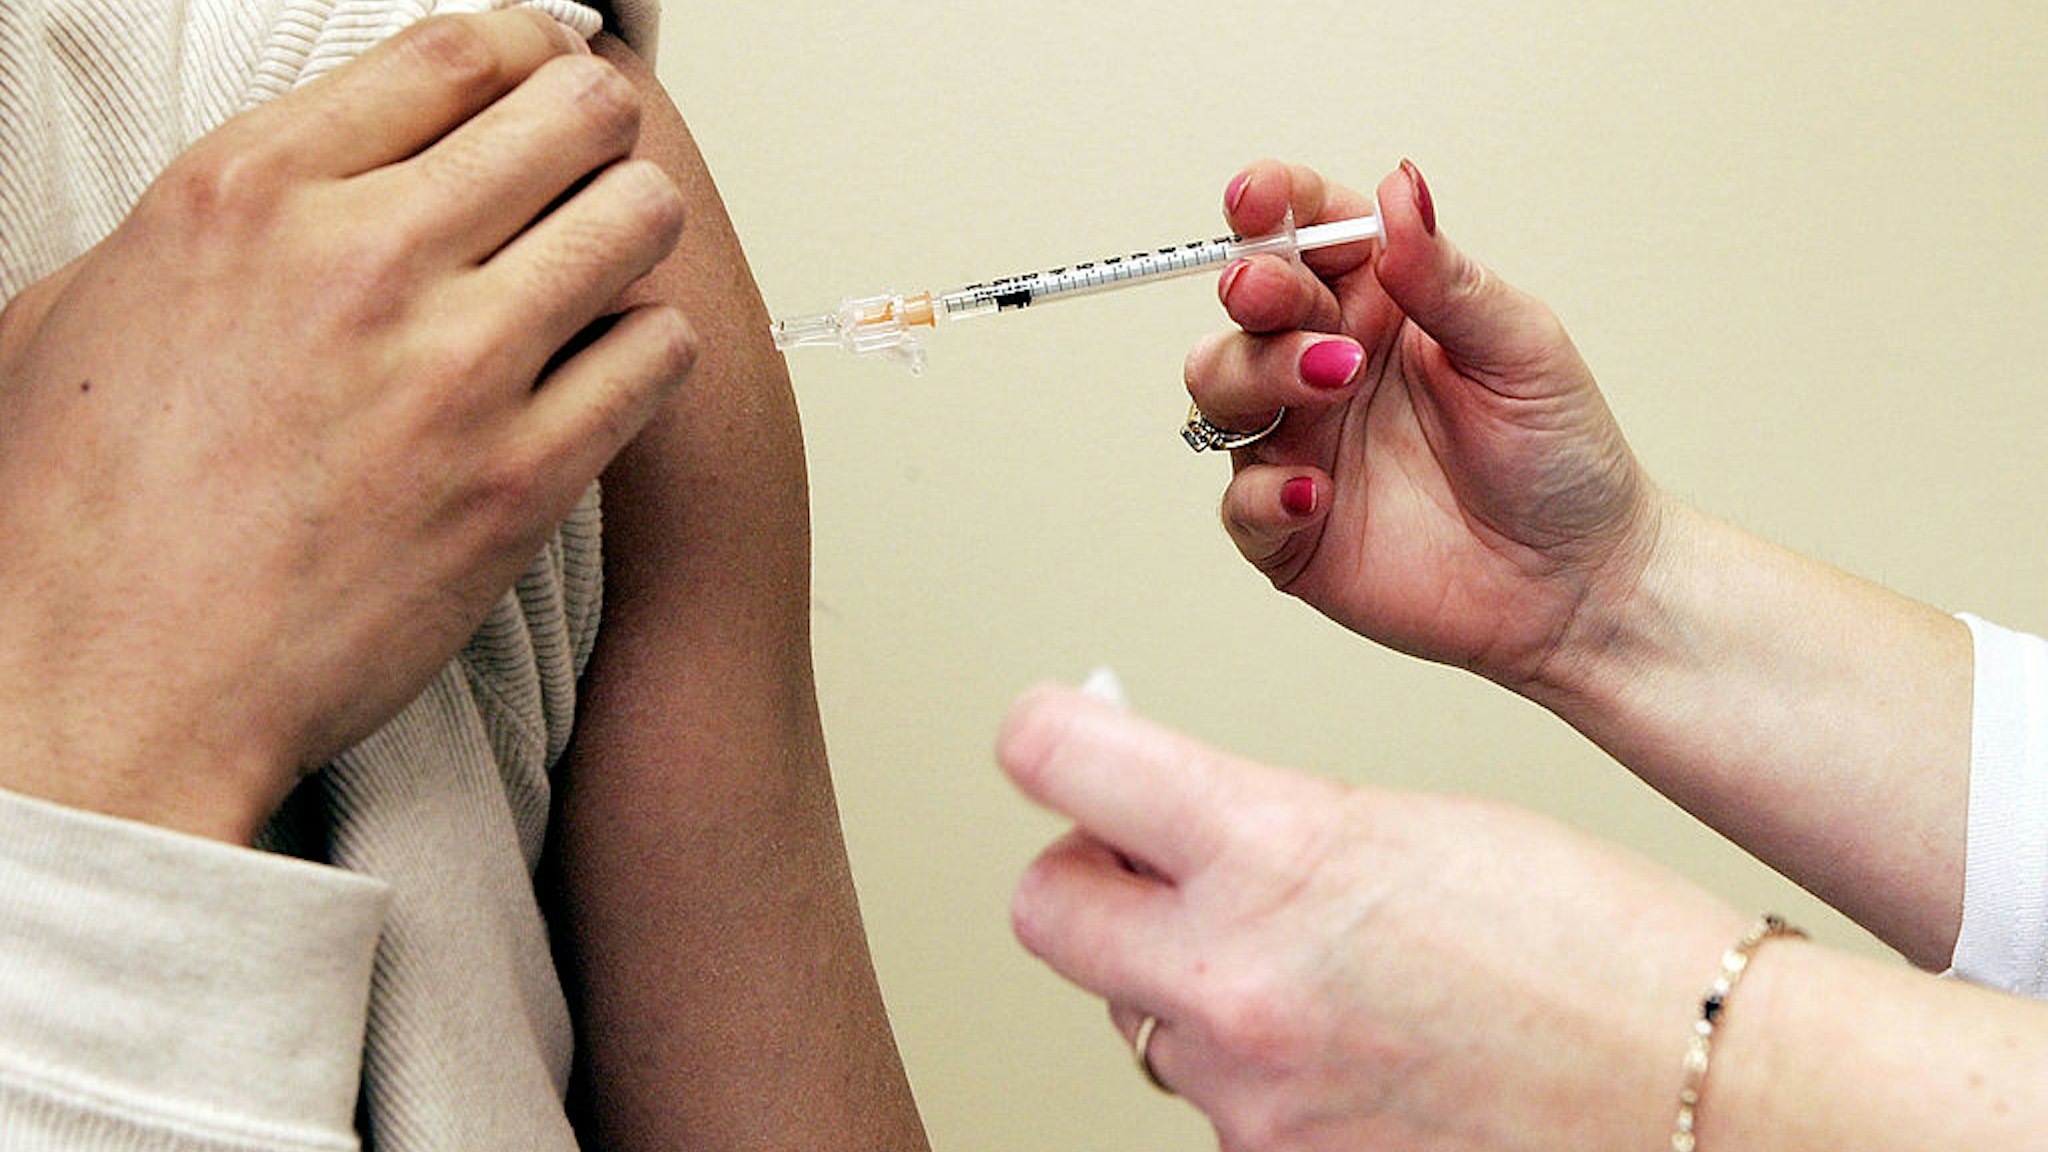 Nurse Coordinator Lisa Chrisley (R) injects an experimental flu vaccine into the arm of volunteer Kwisa Kang of Mt. Washington, Maryland, a medical school researcher, during a clinical trial to test the effectiveness of the vaccine to combat avian influenza April 5, 2005 at University of Maryland School of Medicine in Baltimore, Maryland.